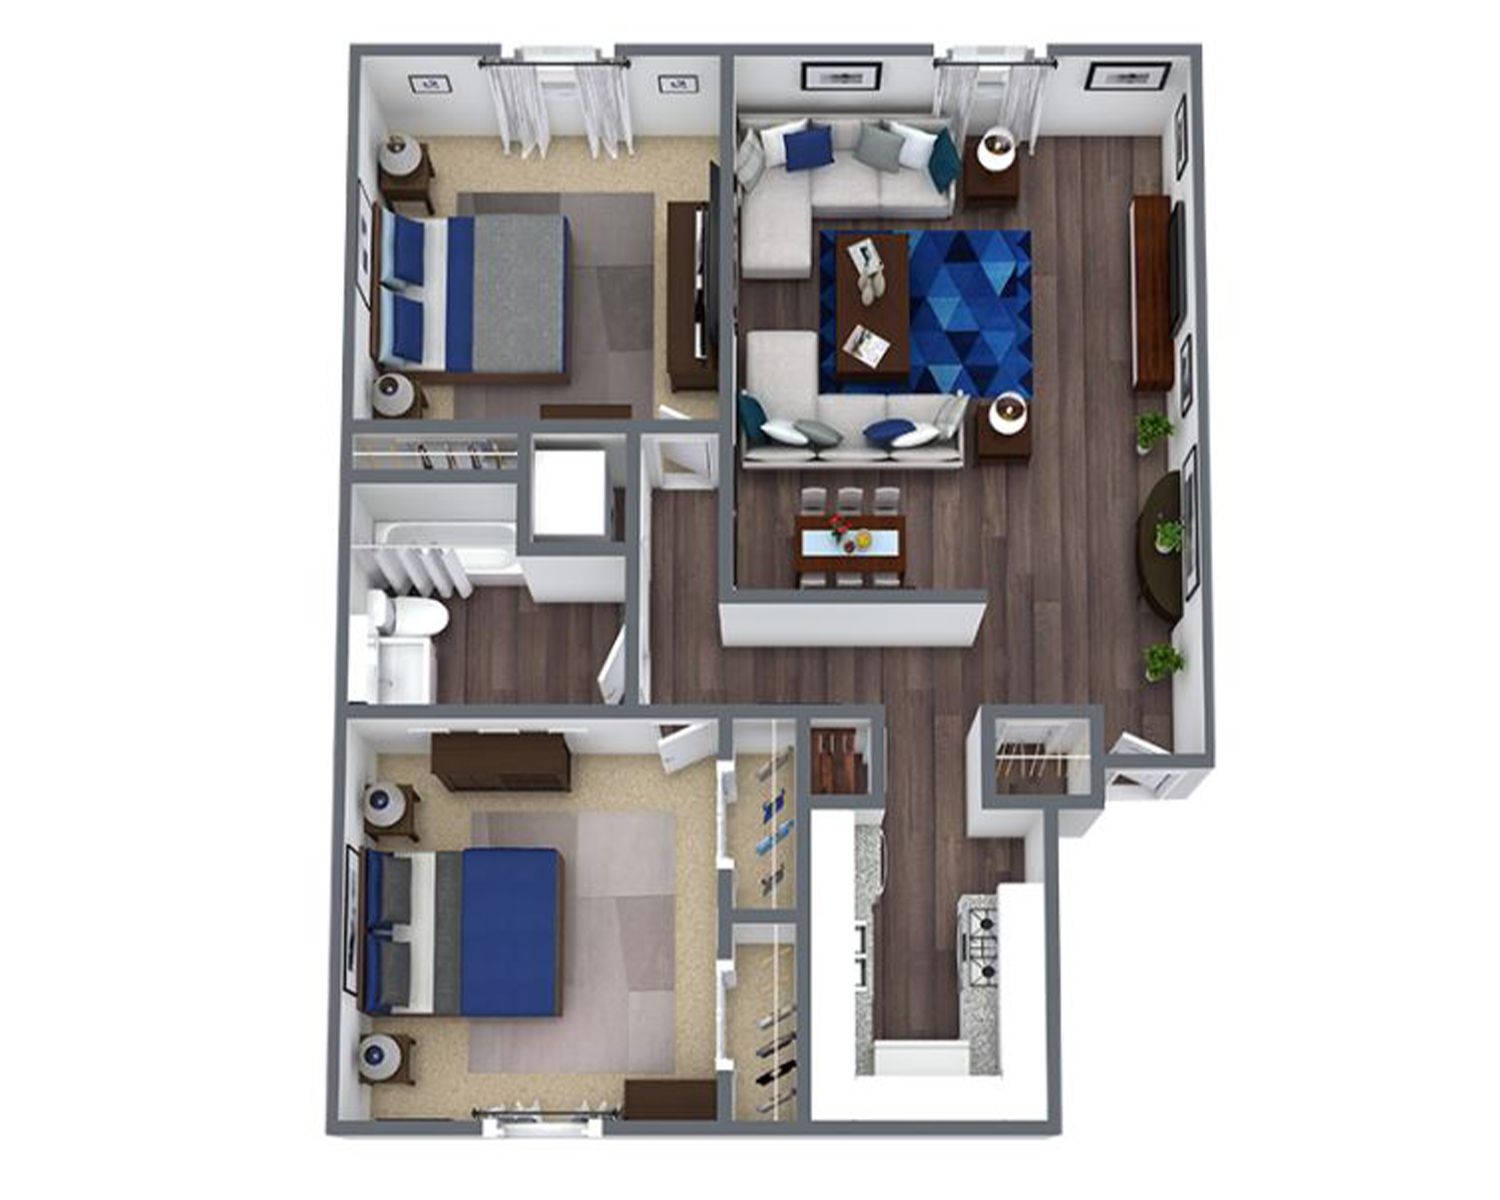 two bed one bath apartment floor plan at 1,011 square feet